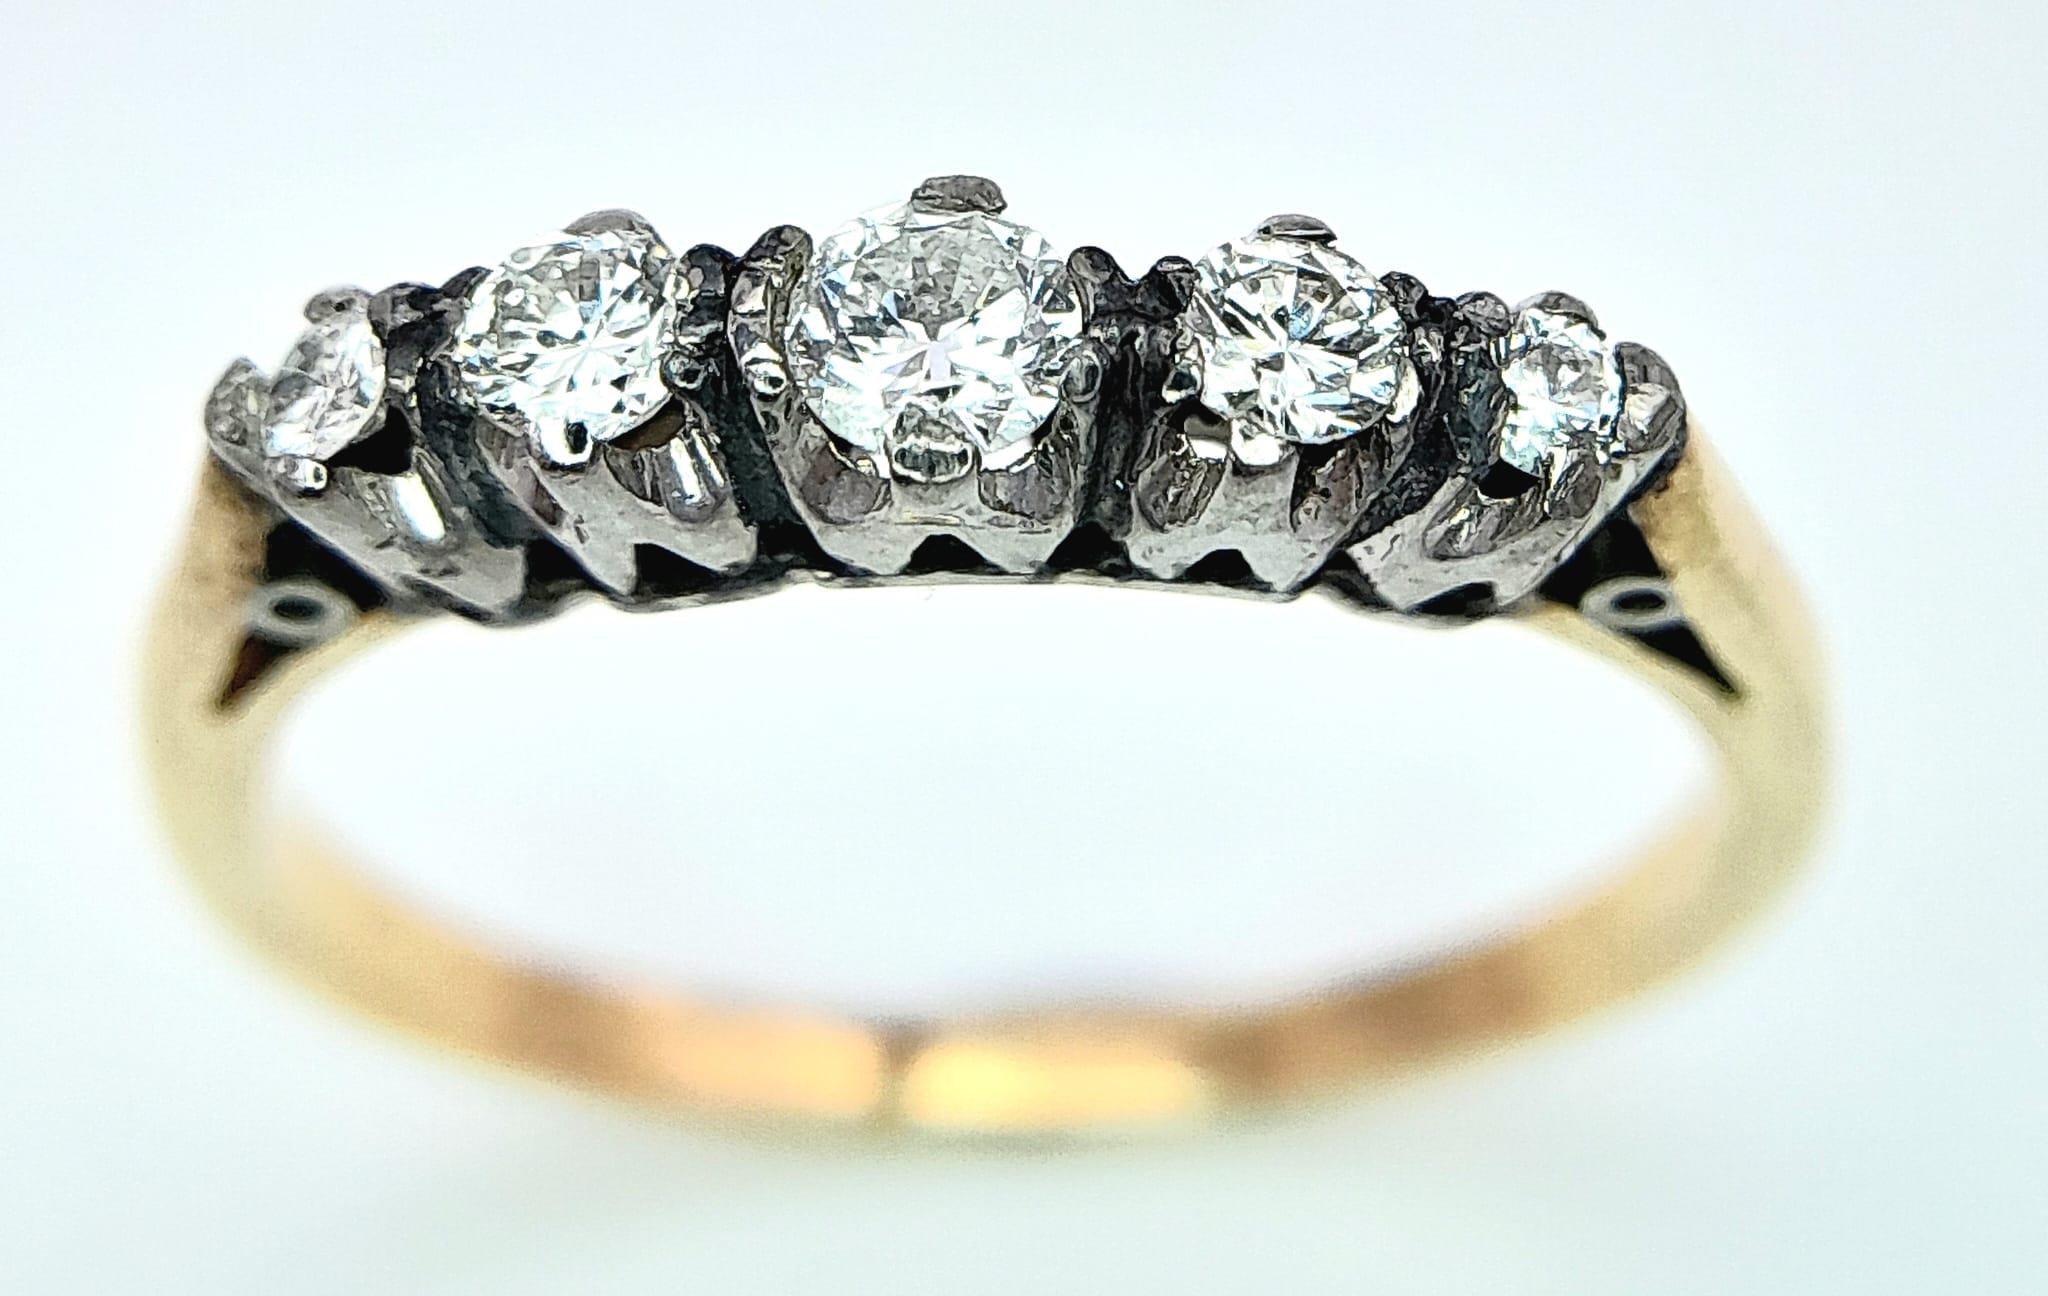 AN 18K YELLOW GOLD & PLATINUM VINTAGE OLD CUT DIAMOND 5 STONE RING. 0.20CTW. 1.5G. SIZE J - Image 2 of 4